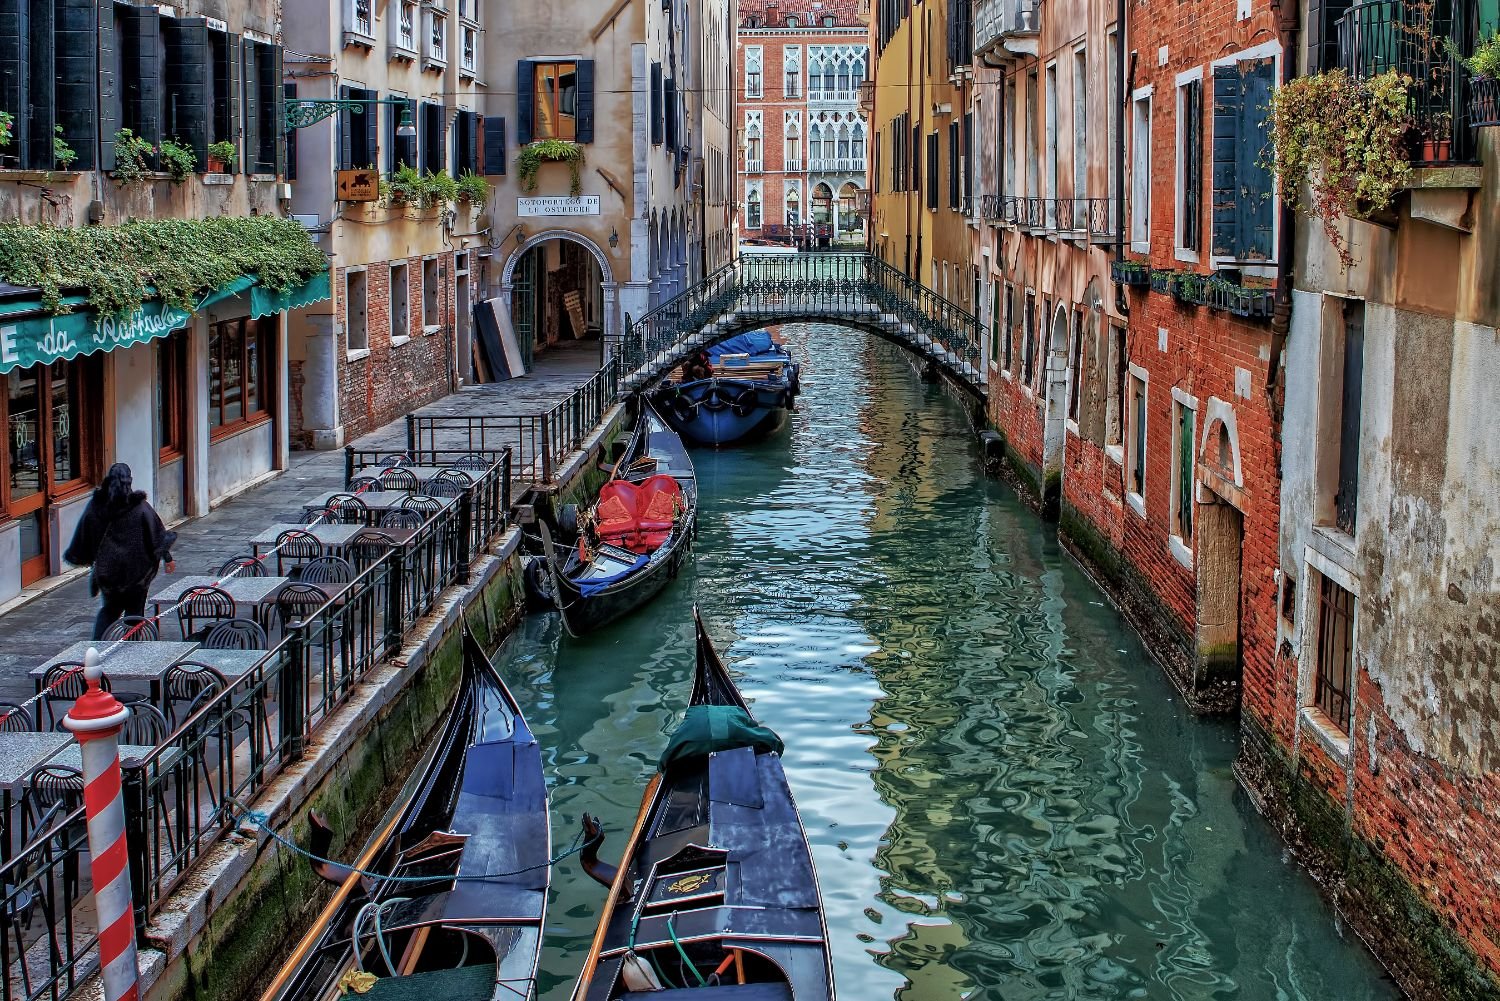 Restrictions will apply to tourists in Venice